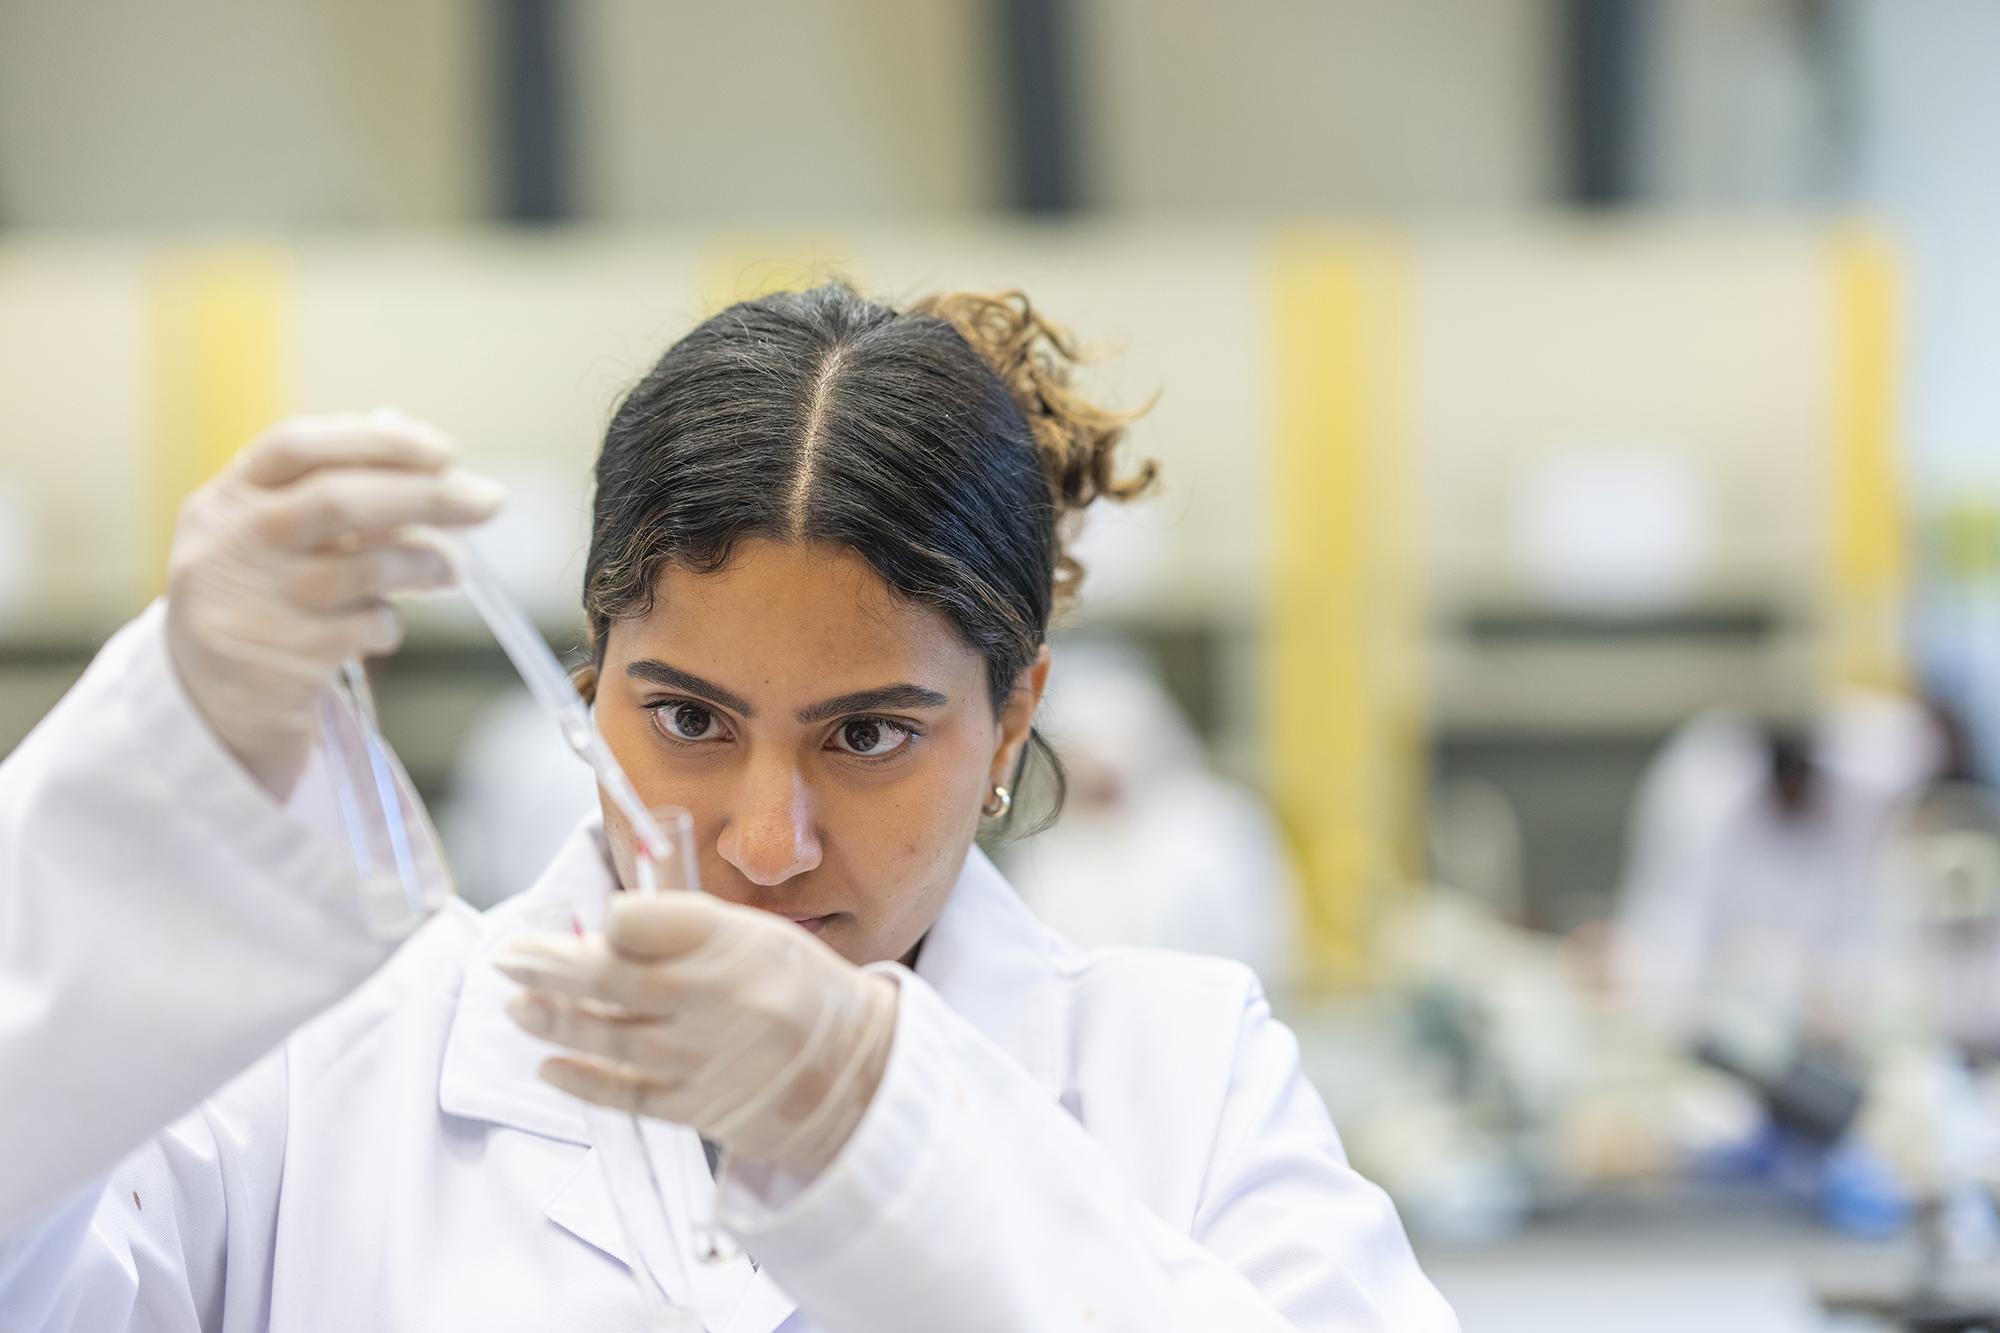 female student in lab coat working with chemical equipment in lab